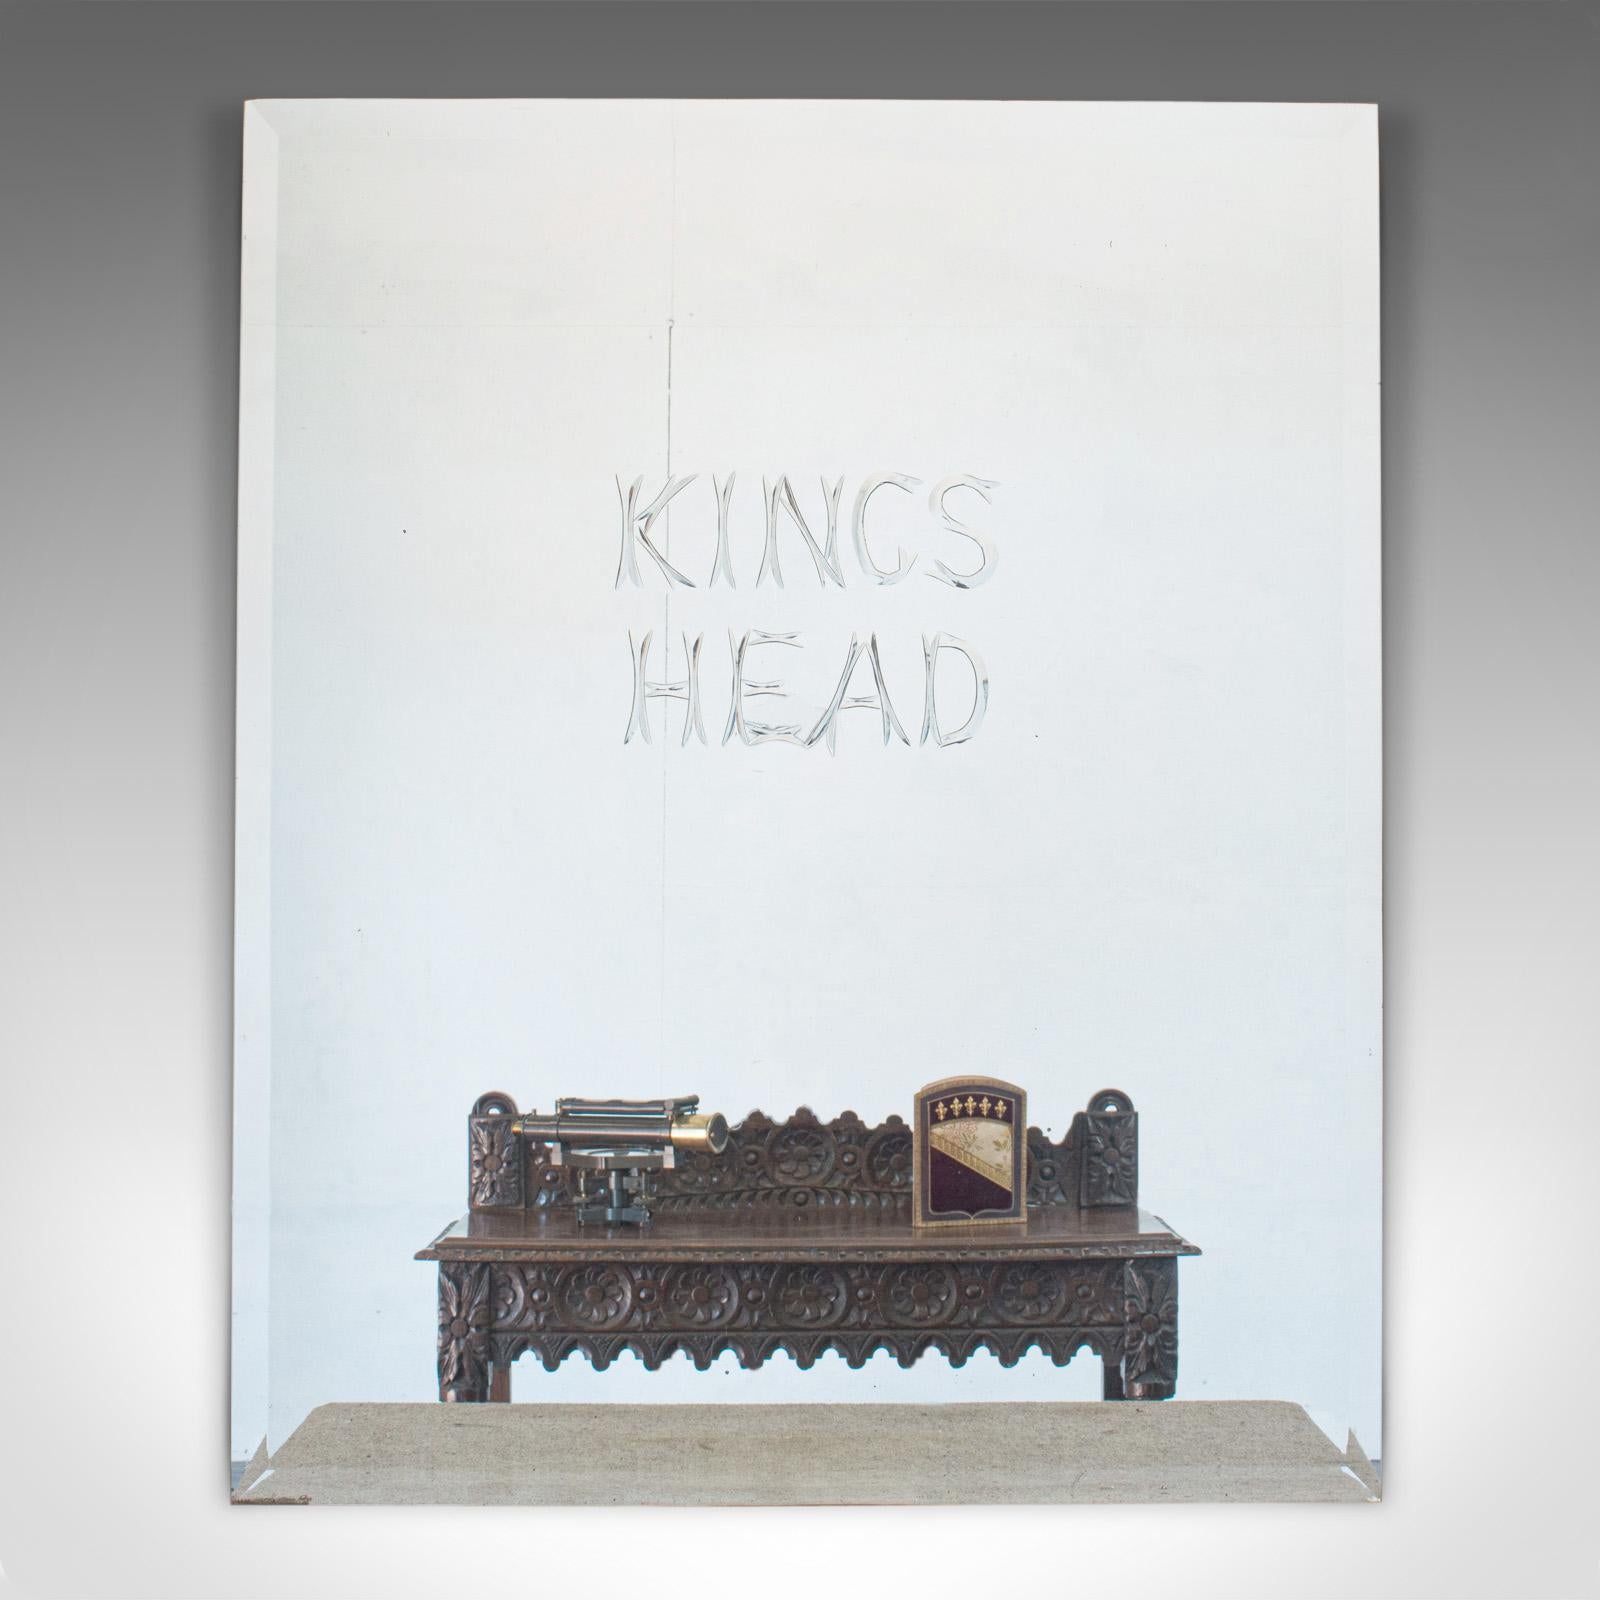 This is a large, vintage etched mirror. An English, glass mirror plate for a Kings Head public house, dating to the late 20th century, circa 1970.

Fascinating etched glass mirror
Displays a desirable aged patina
Glass plate in good original